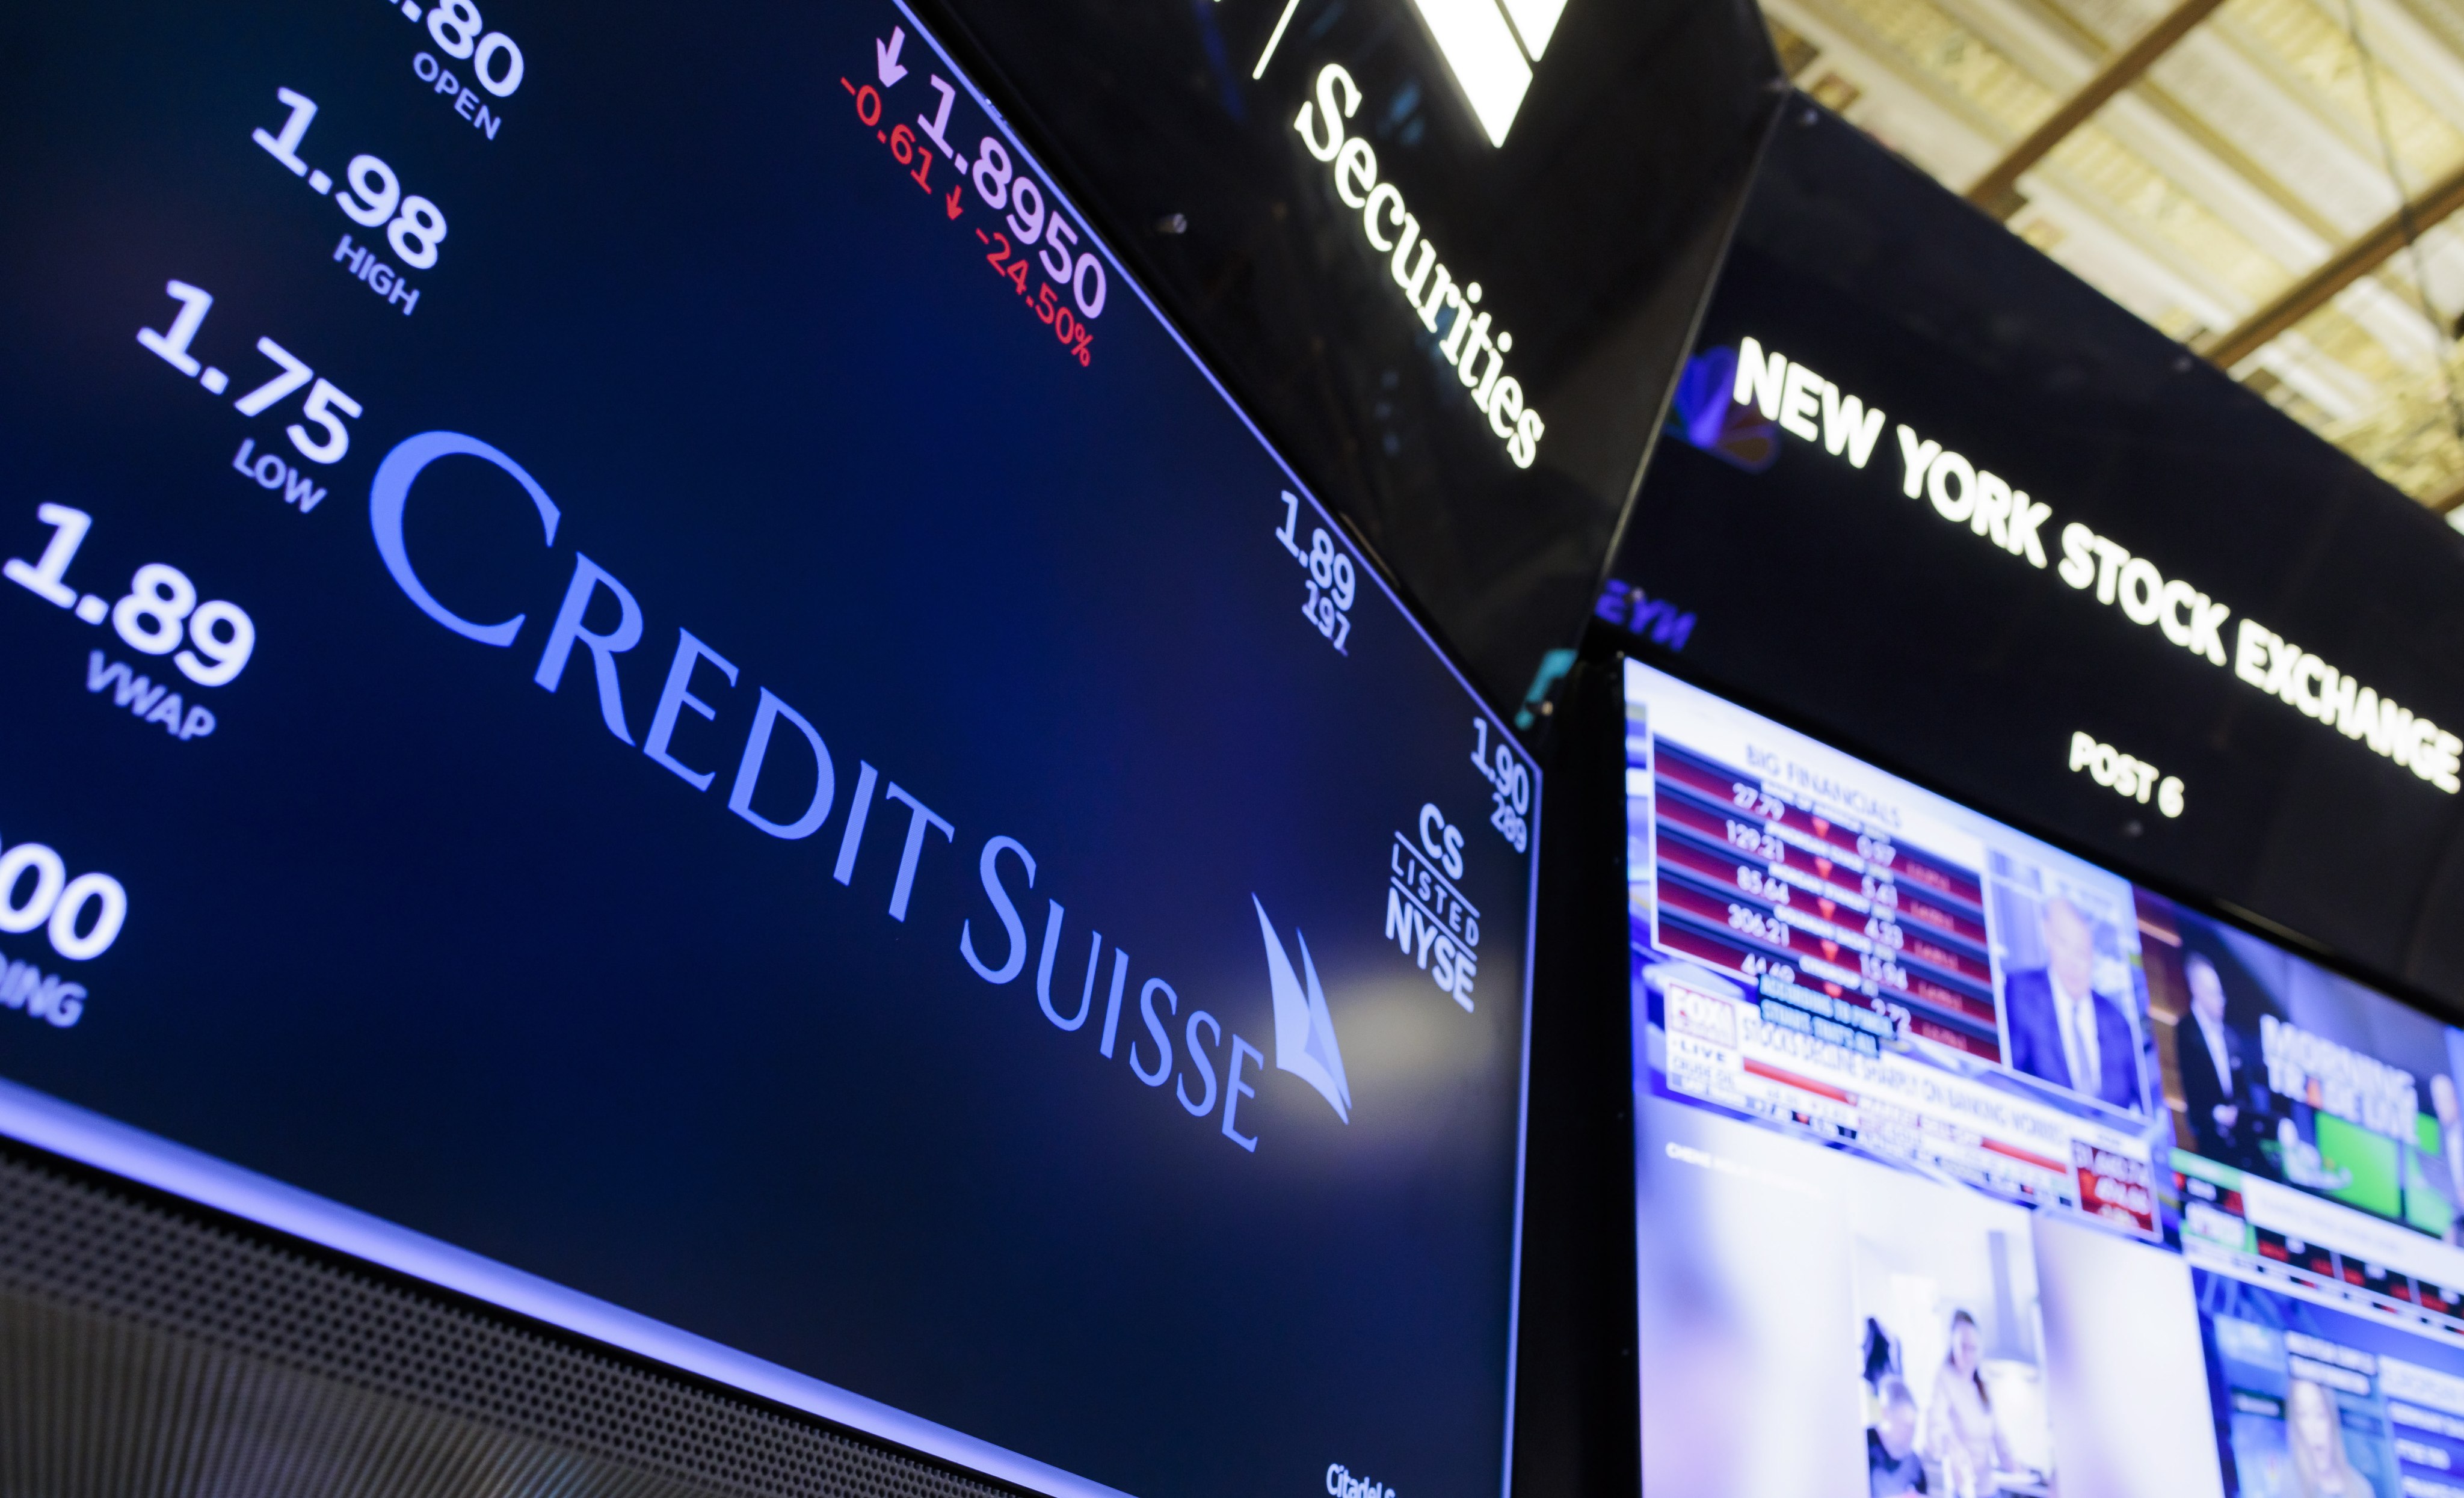 A screen shows Credit Suisse’s stock price on the floor of the New York Stock Exchange in New York on March 15, 2023. Photo: EPA-EFE